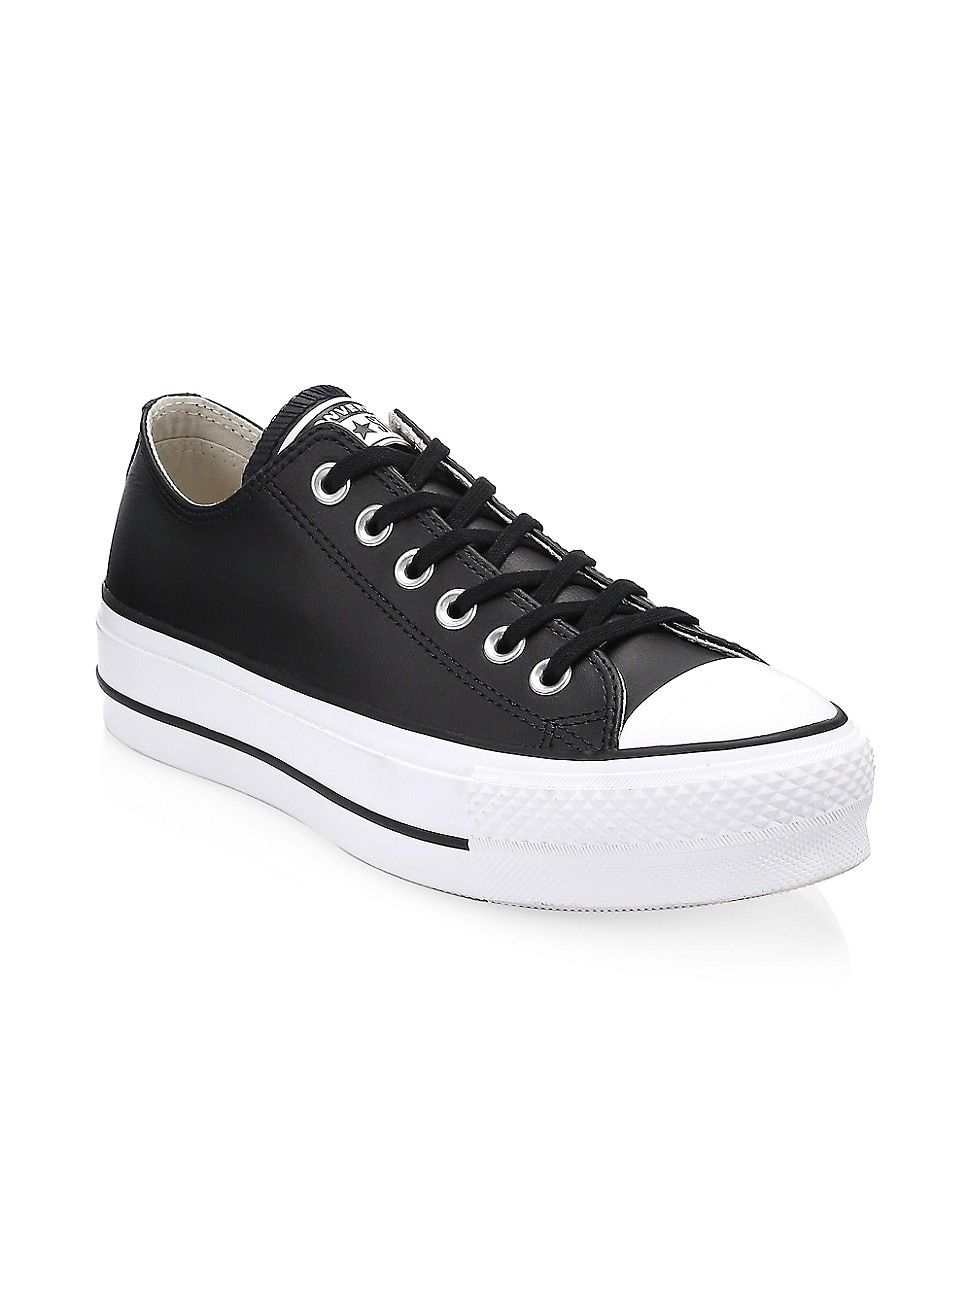 Converse Women's Chuck Taylor All Star Lift Leather Low-Top Sneakers - Black - Size 7 UK (9 US) | Saks Fifth Avenue